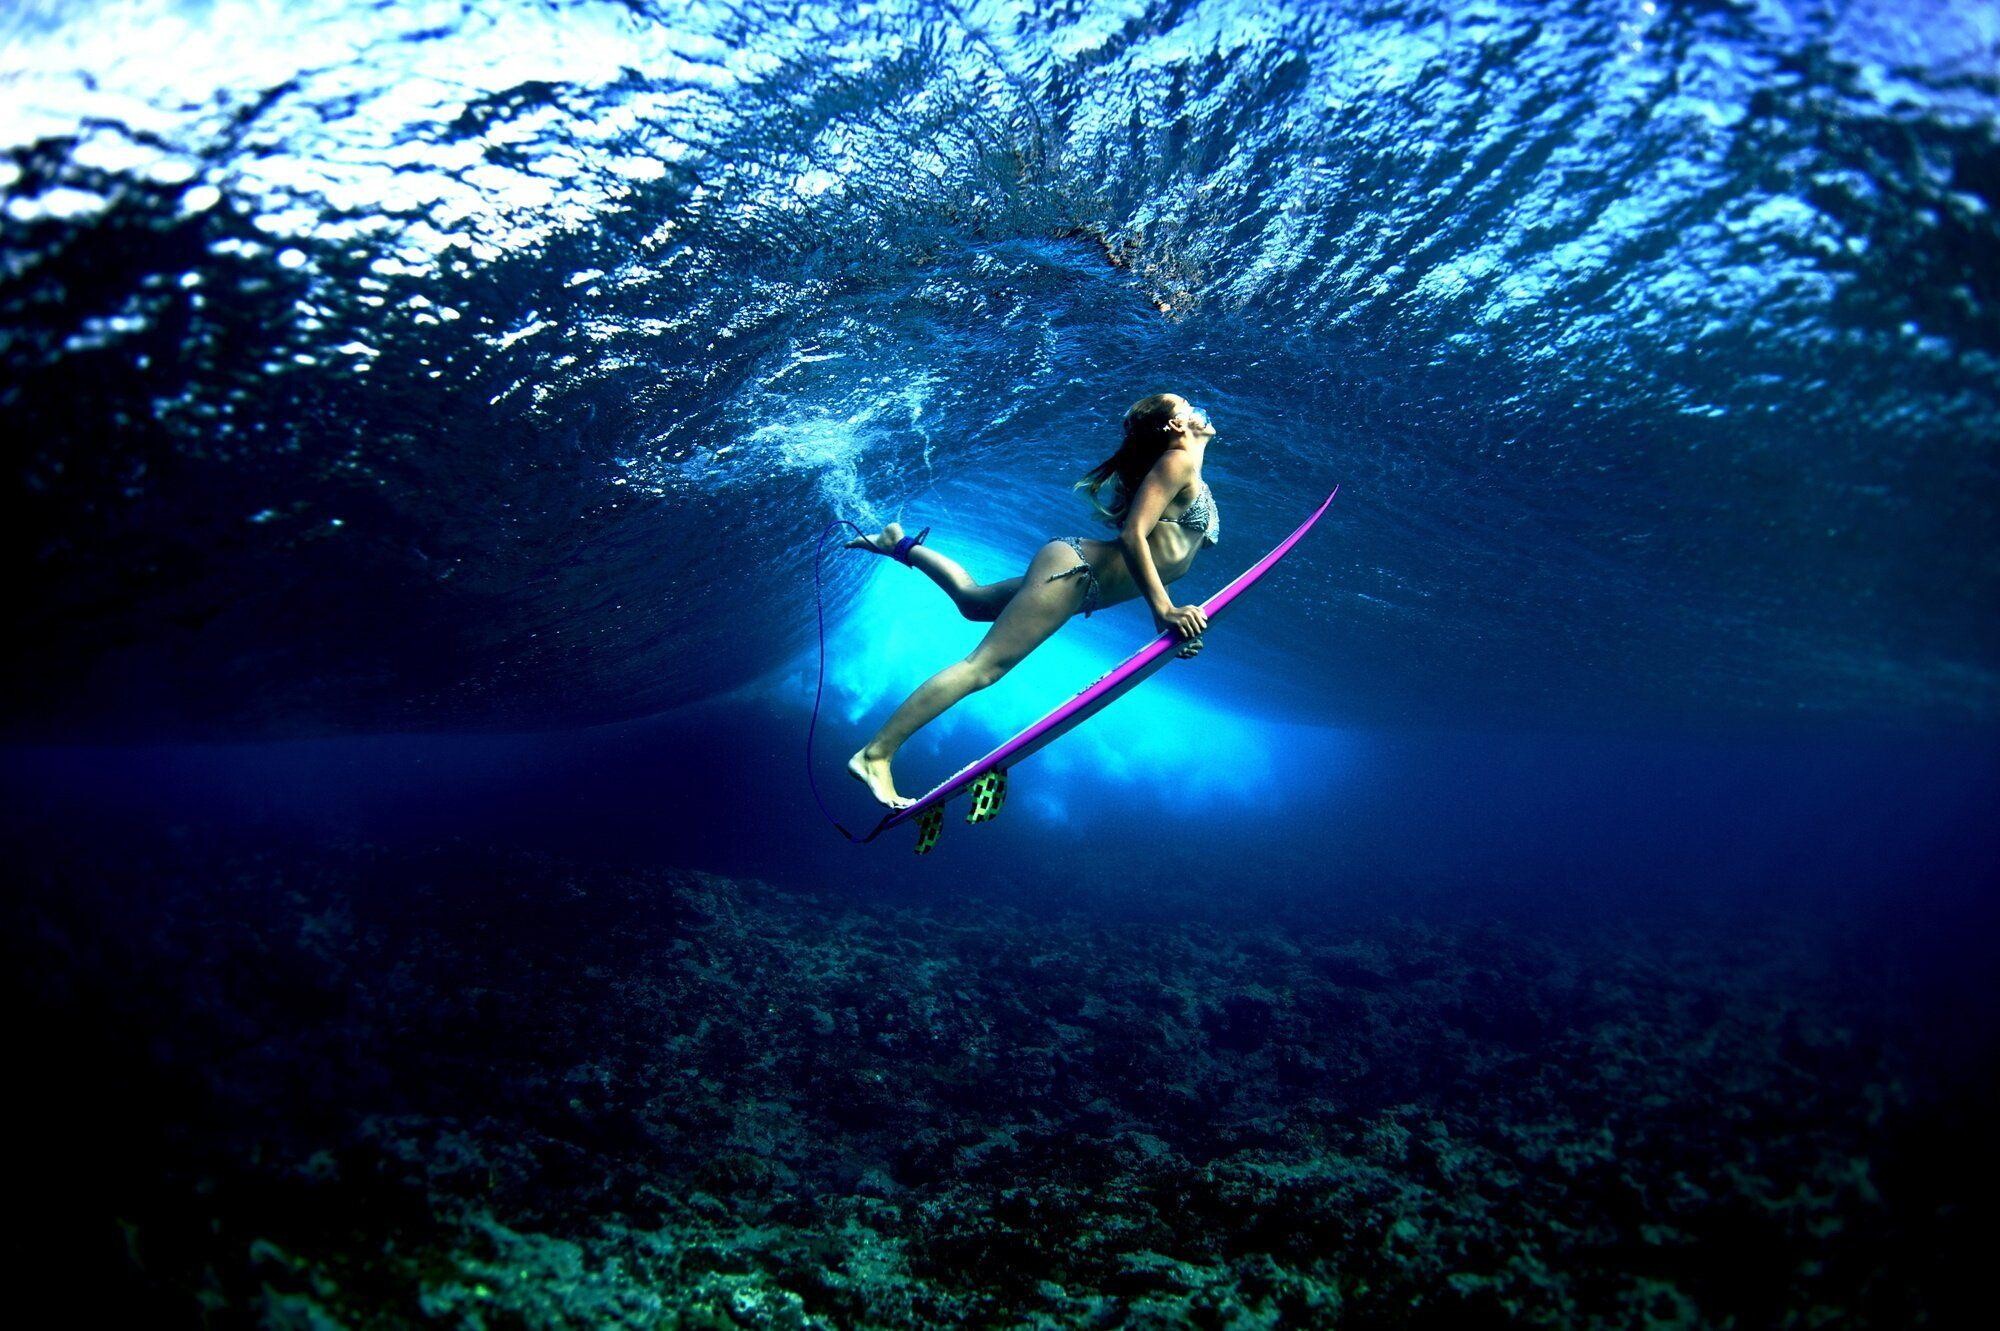 Girl Surfing: Underwater extreme sport, Tow-in cross-over water sports discipline. 2000x1340 HD Wallpaper.